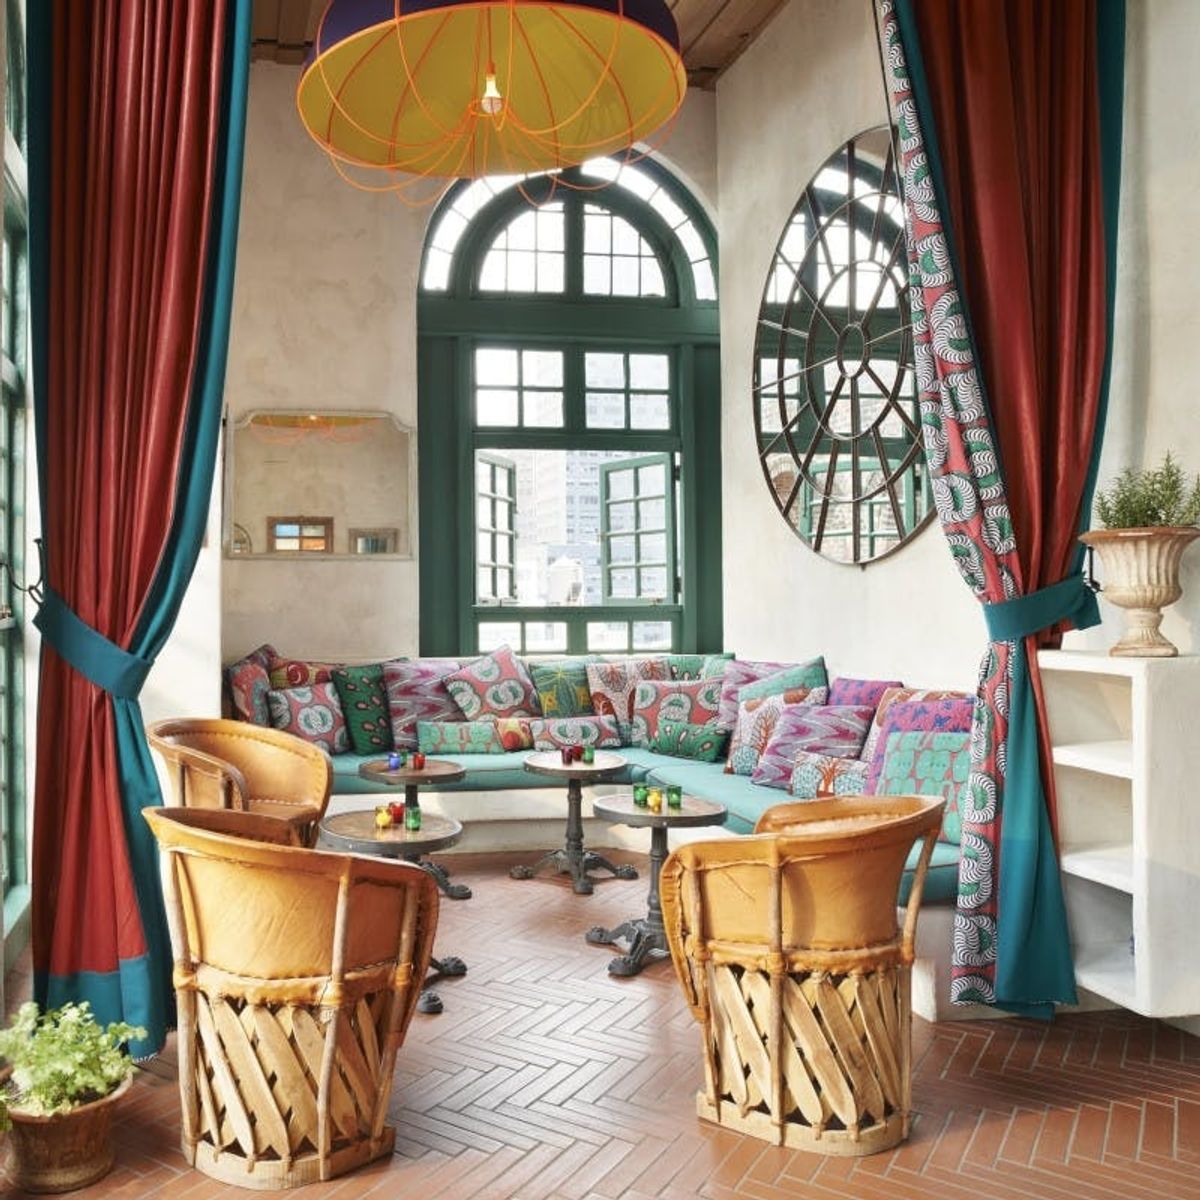 18 Hotels Perfect for a Nostalgic BFF Slumber Party